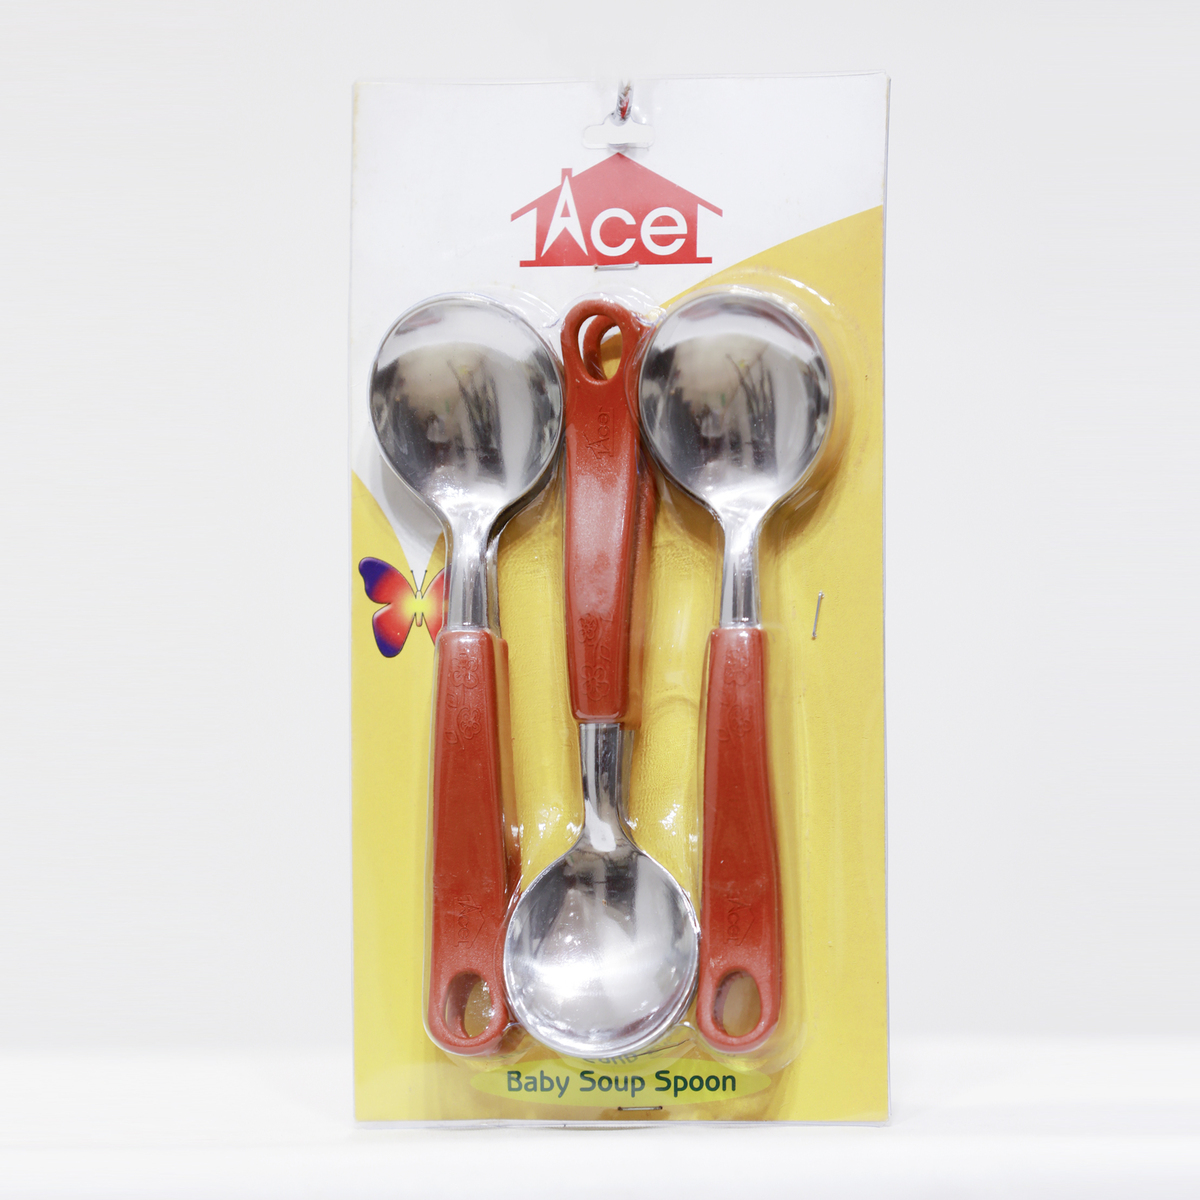 Ace Baby Soup Spoon